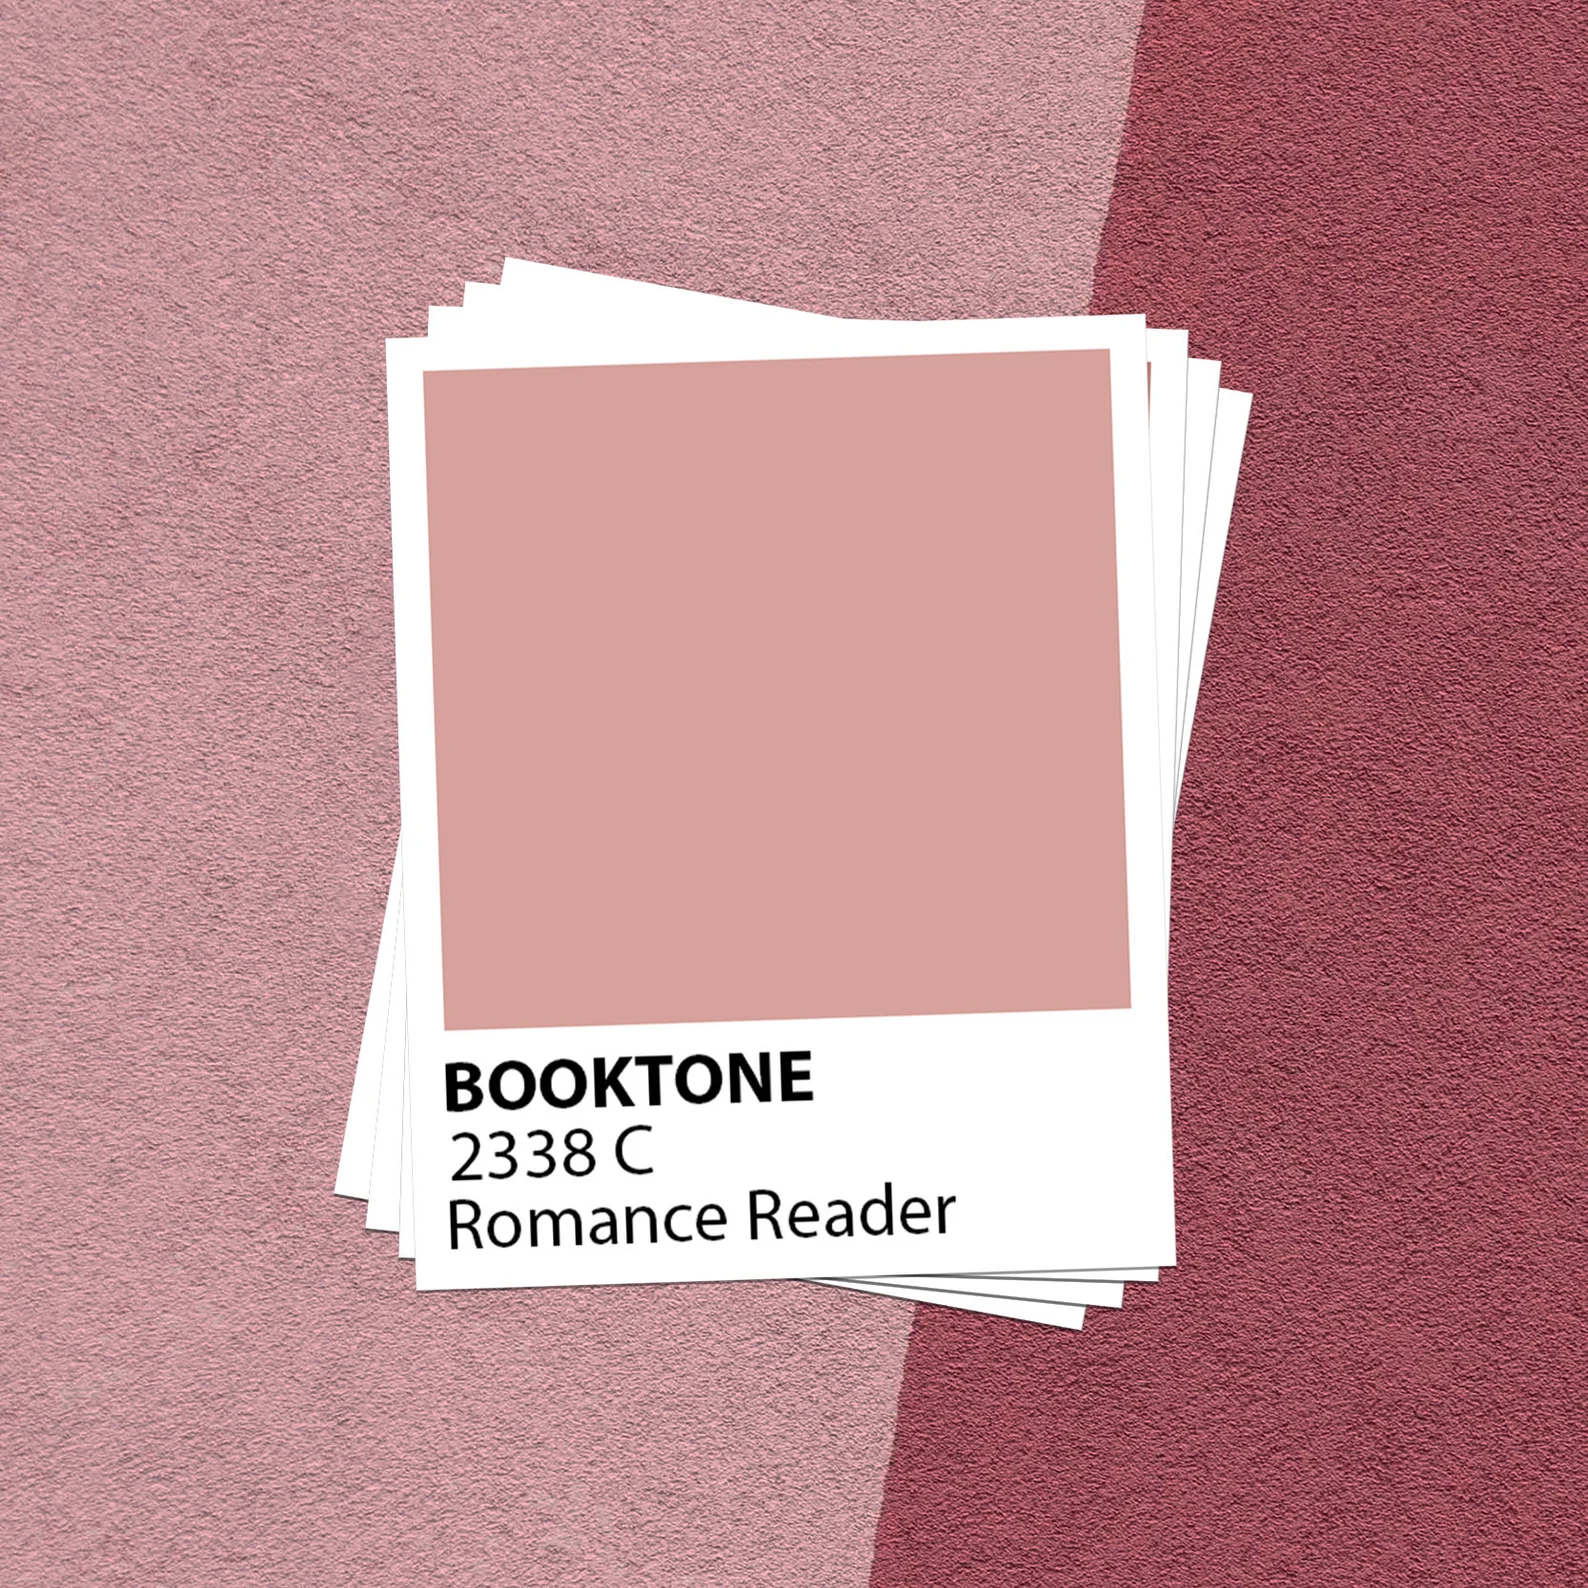 Image of a sticker in the style of a Pantone color swatch. It says "booktone," with a color number and name "romance reader." It is pink. 